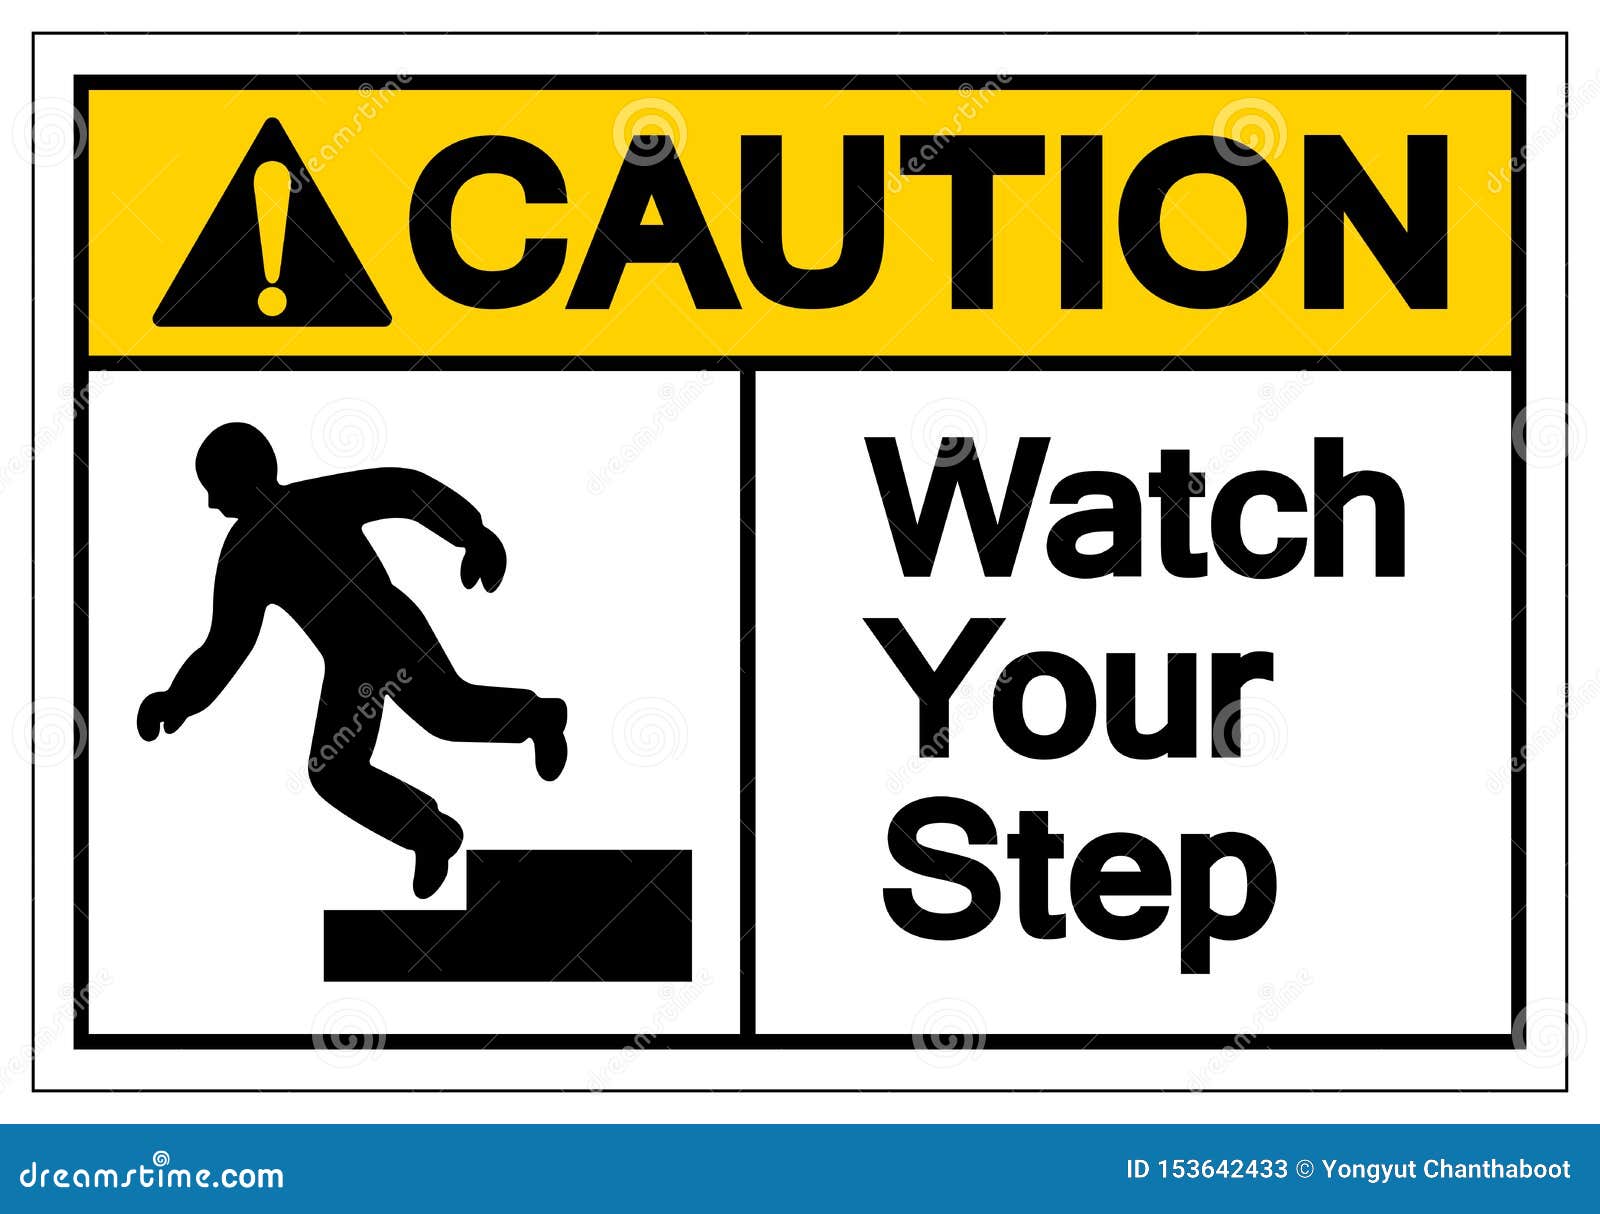 caution-watch-your-step-symbol-sign-vector-illustration-on-white